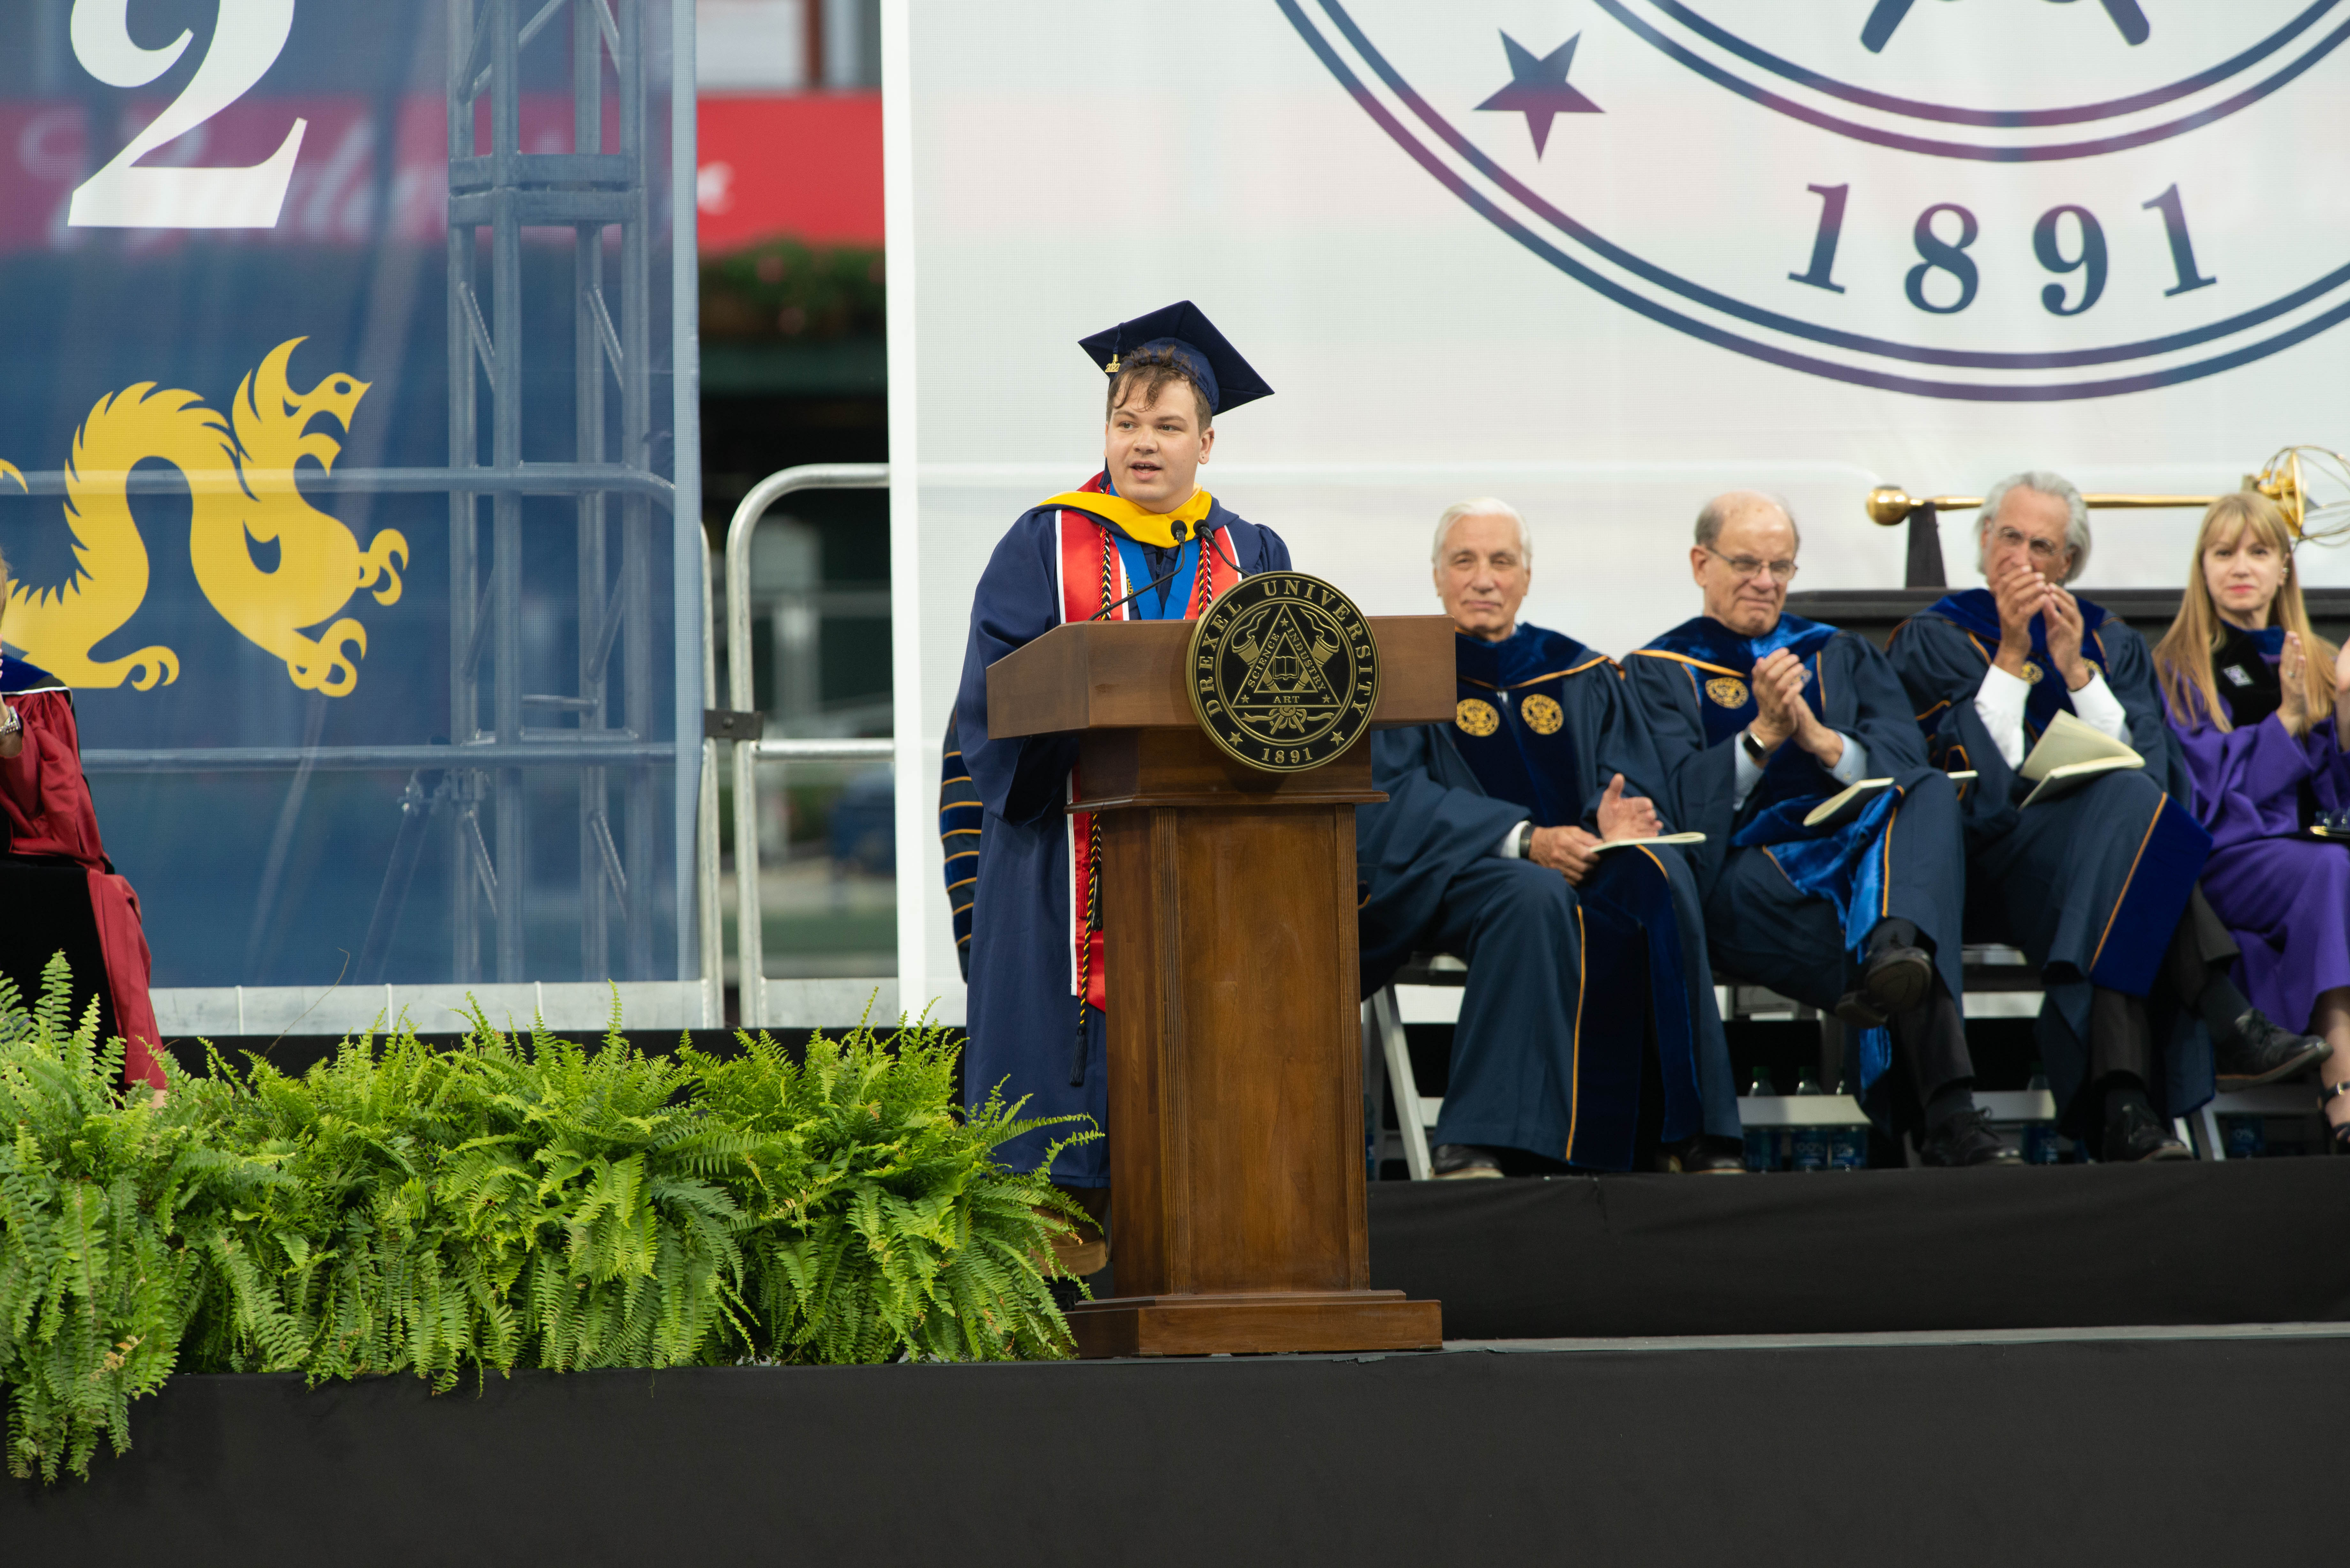 Jarod Watson, BS entertainment and arts management ‘22, at the podium at Drexel's 2022 Commencement. Photo credit: Kelly & Massa Photography.